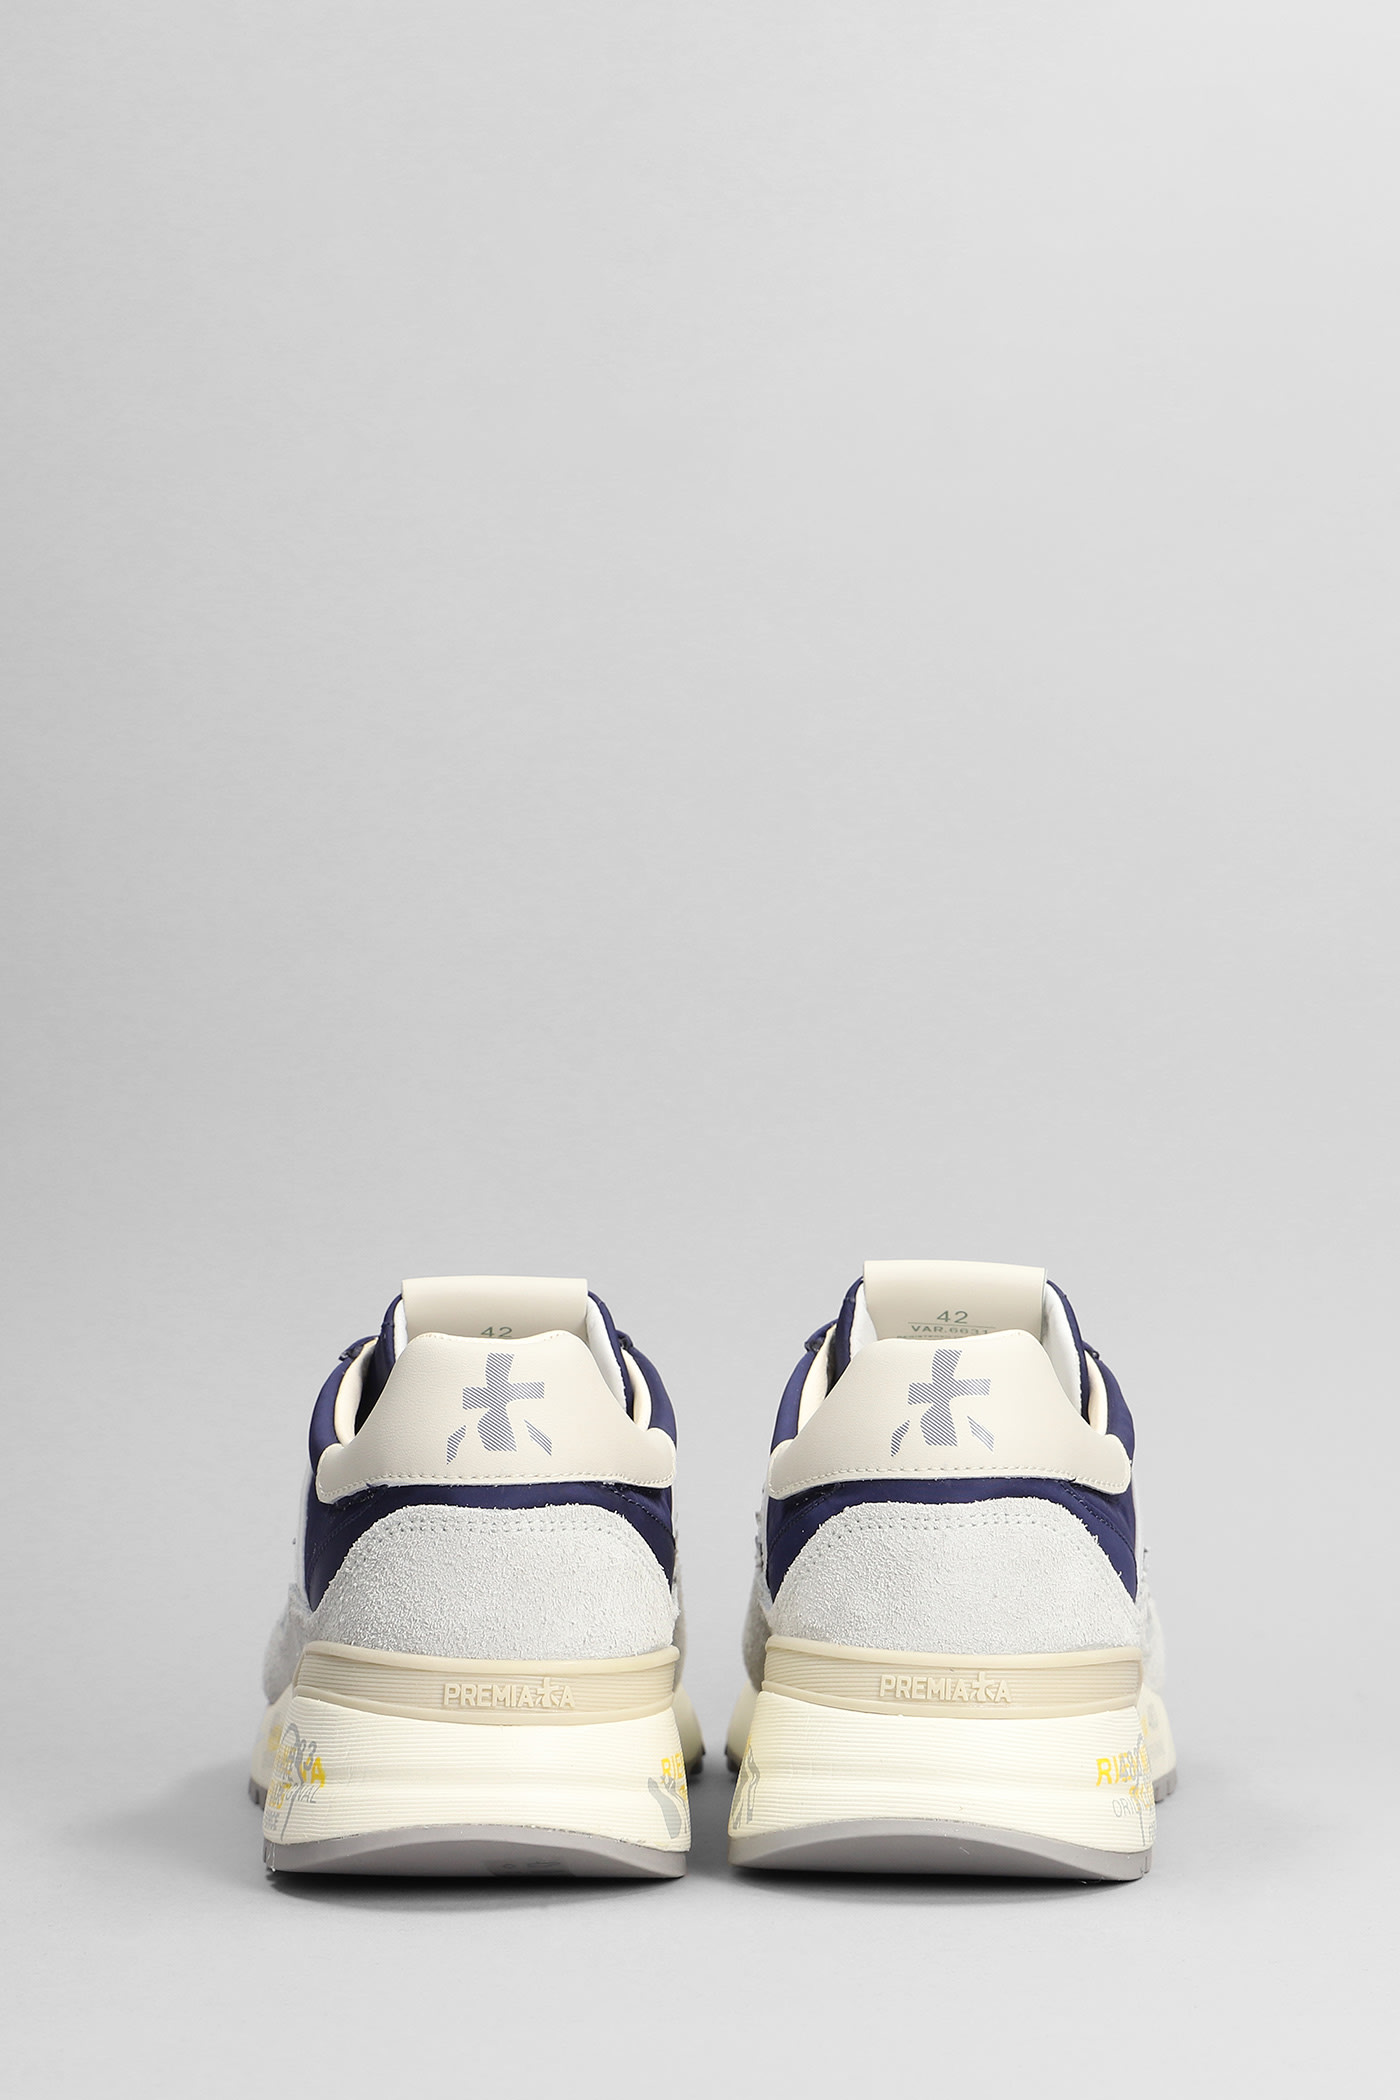 Shop Premiata Landeck Sneakers In Blue Suede And Fabric